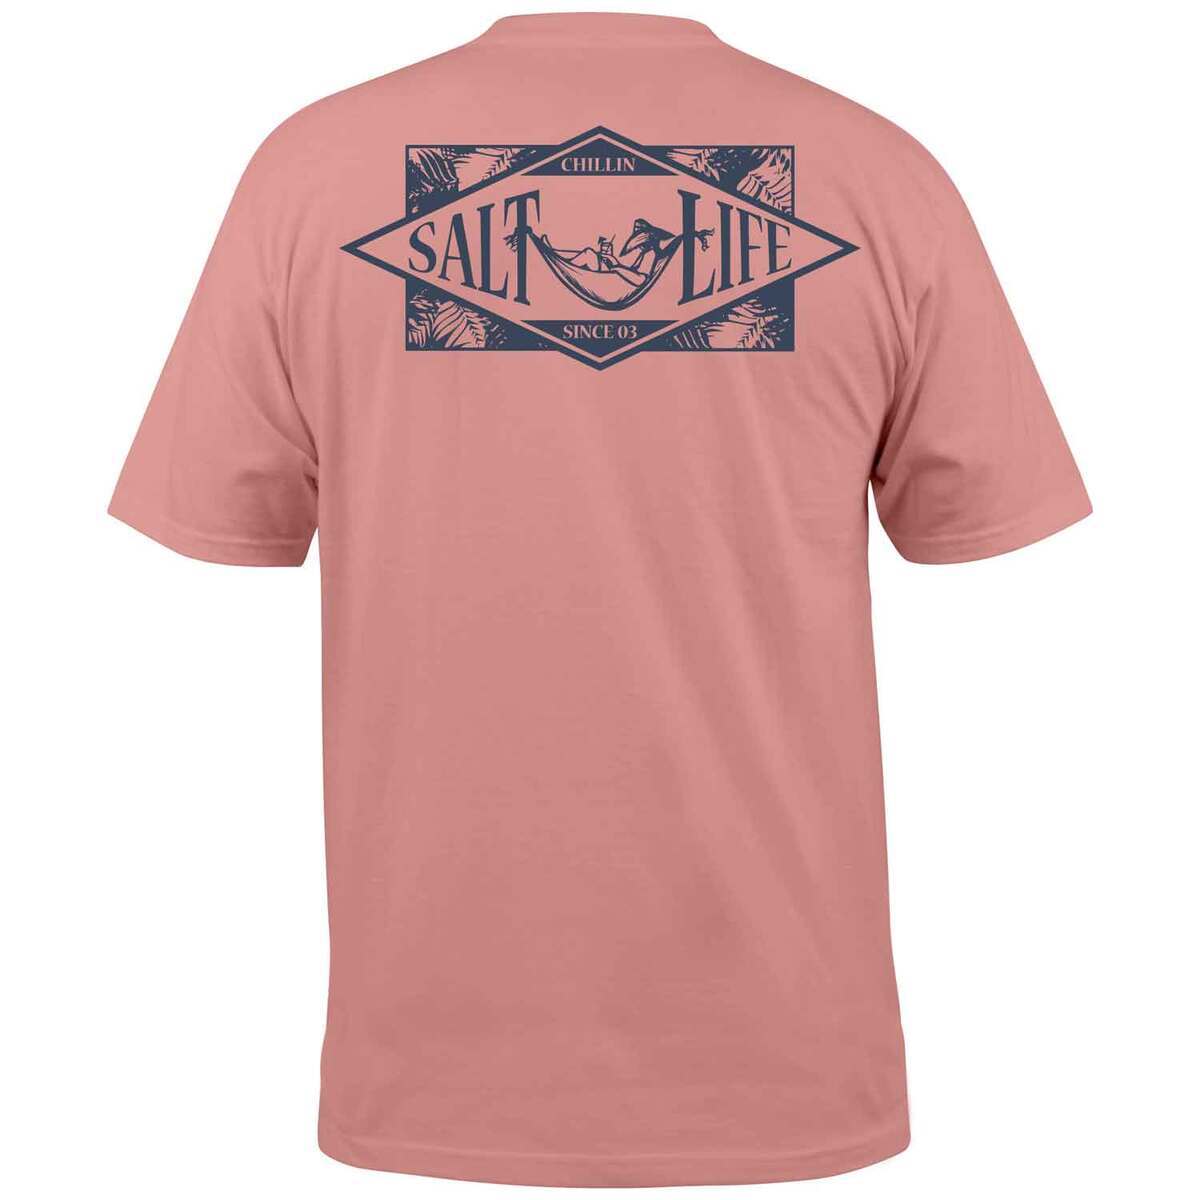 Salt Life - Chillin' Since 'O3 Large / Pink Clay / Short Sleeve